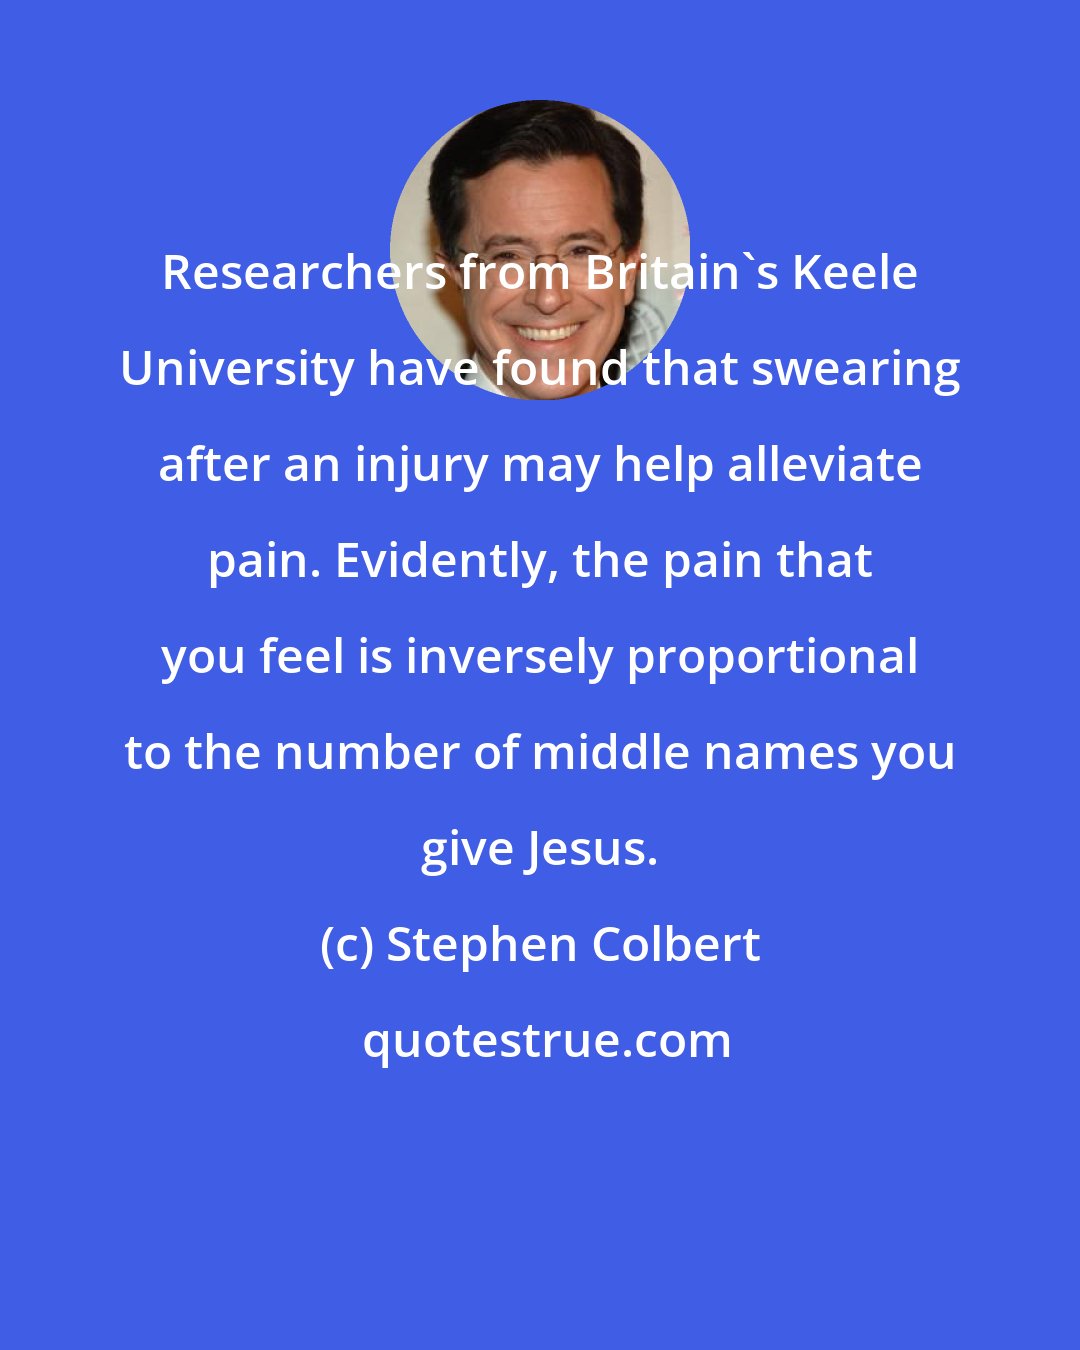 Stephen Colbert: Researchers from Britain's Keele University have found that swearing after an injury may help alleviate pain. Evidently, the pain that you feel is inversely proportional to the number of middle names you give Jesus.